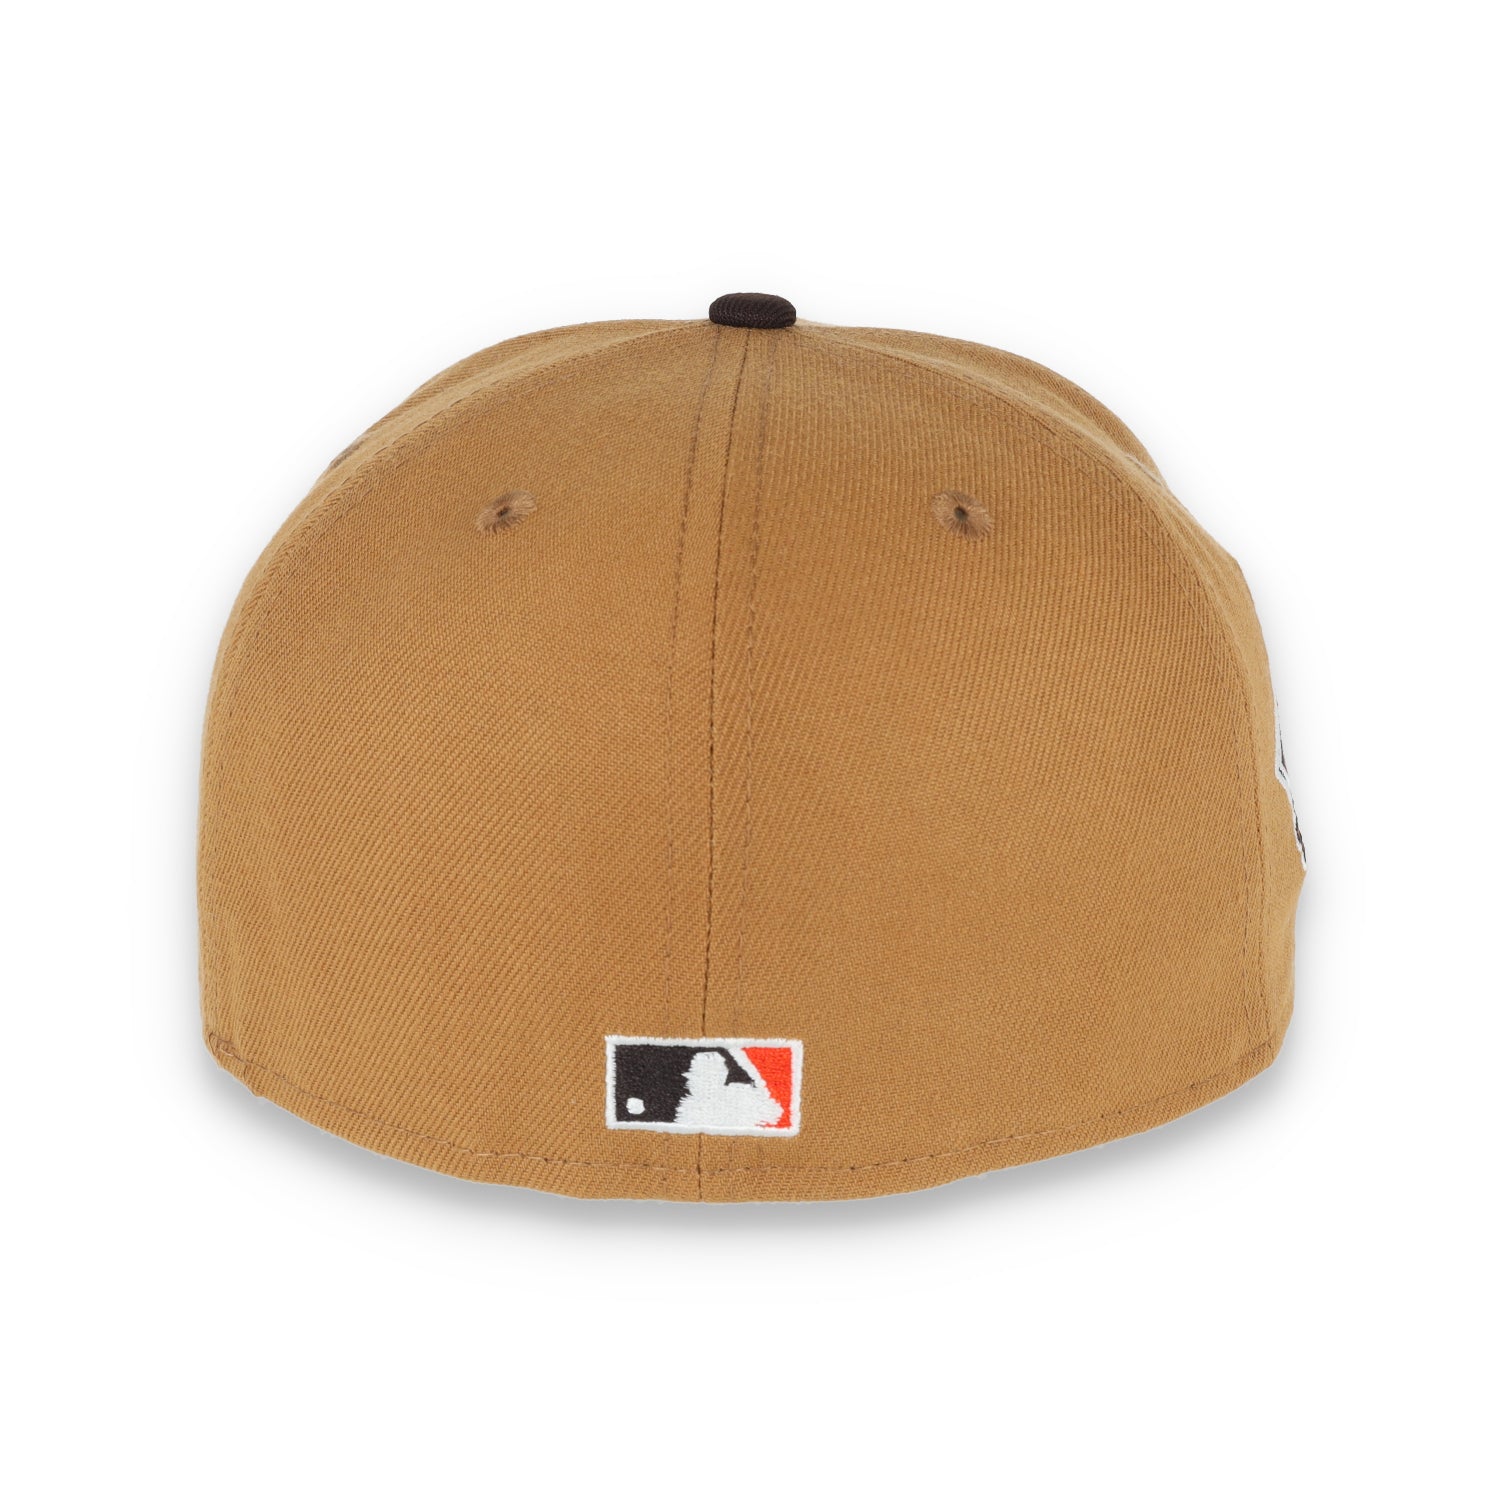 New Era San Francisco Giants "Gigantes" 60th Anniversary Side Patch 59IFTY Fitted hat- Bronze